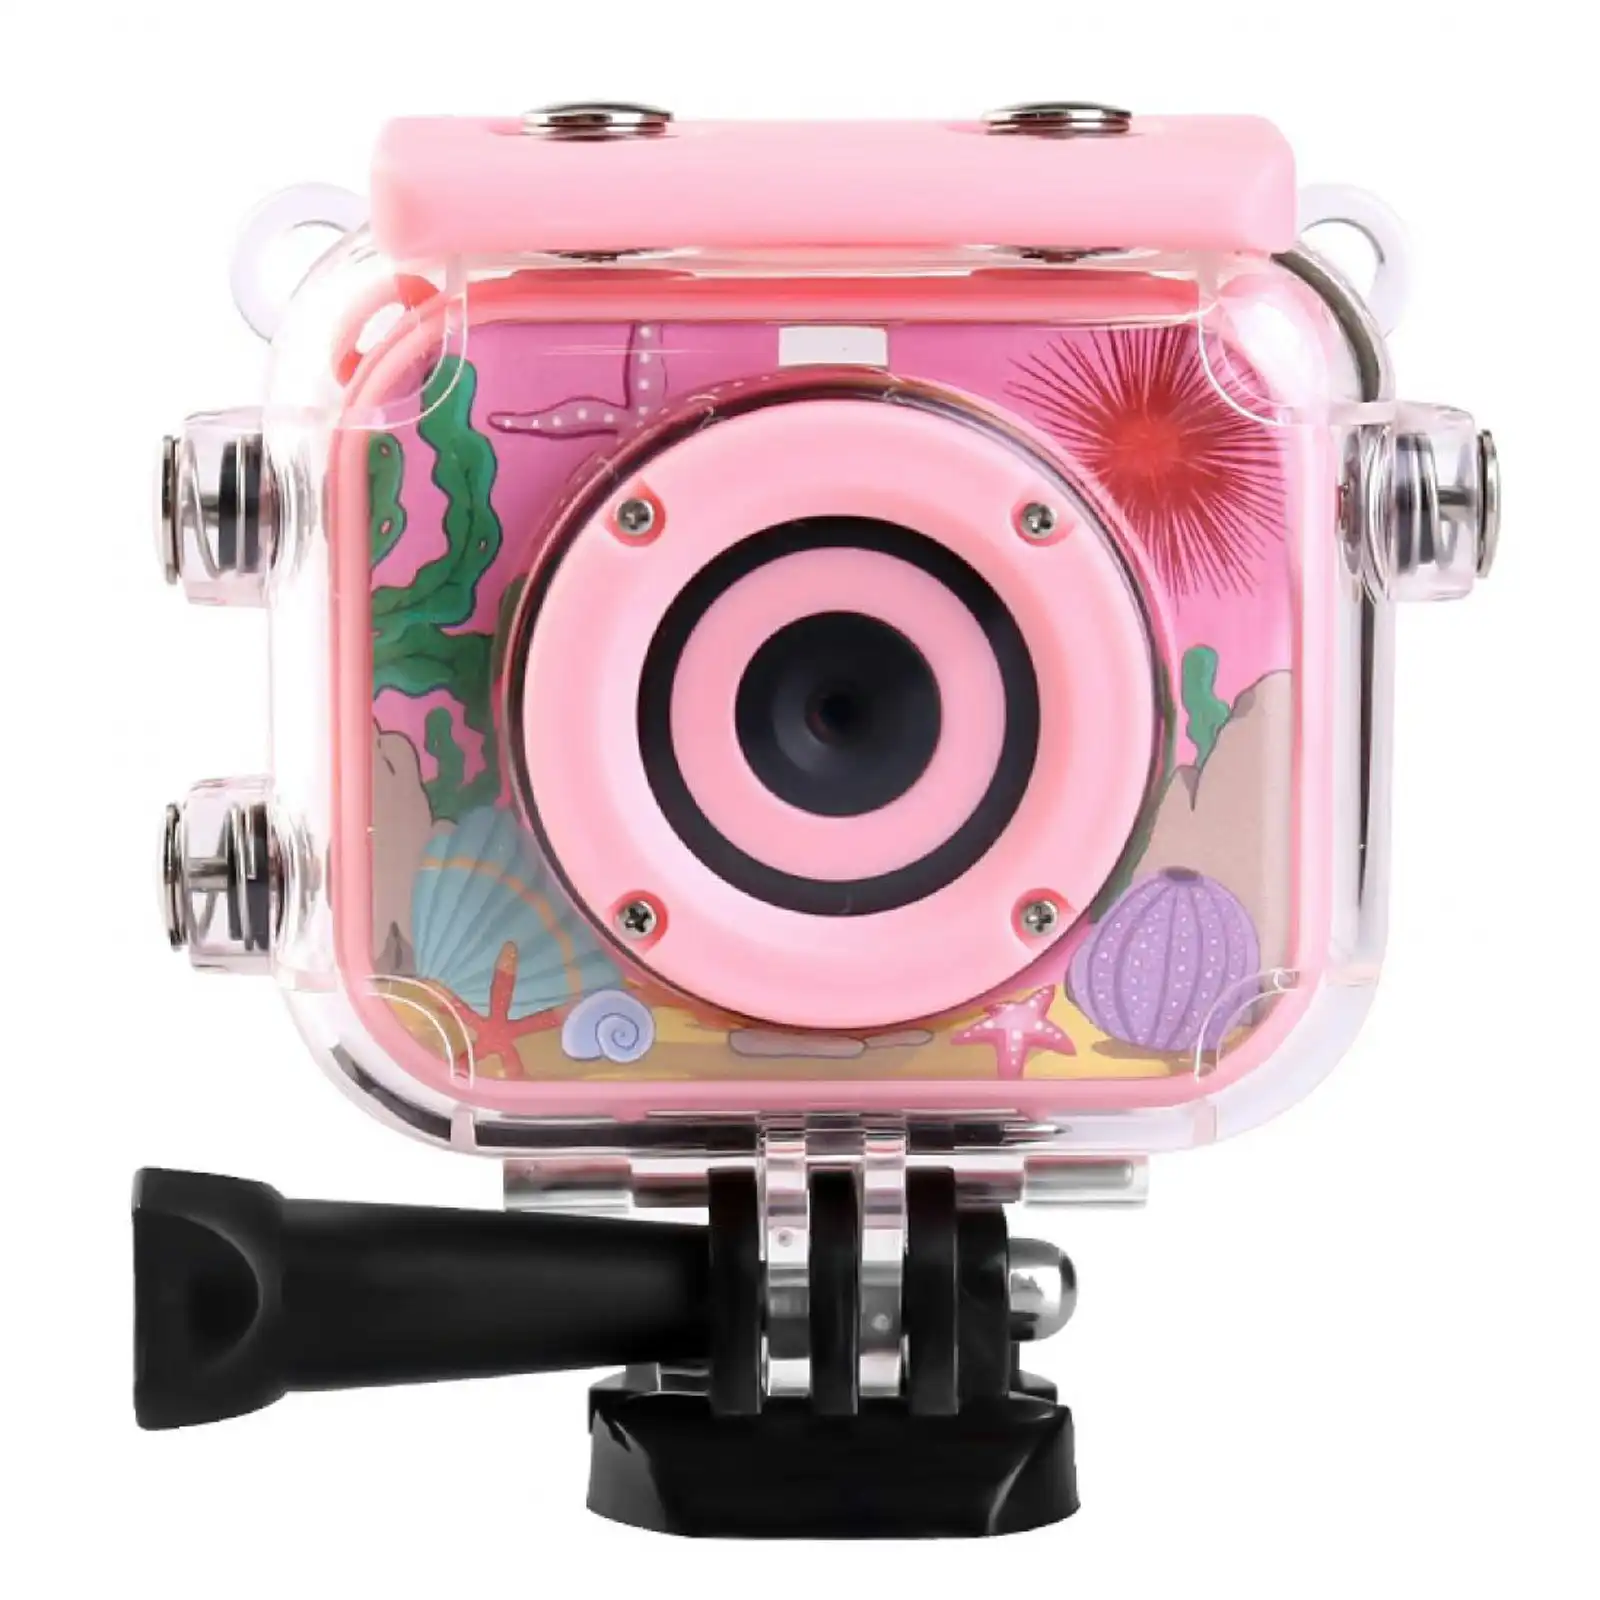 Todo 1080p FHD Kids Action Sports Camera 30M Waterproof 2" LCD Action Cam - Pink